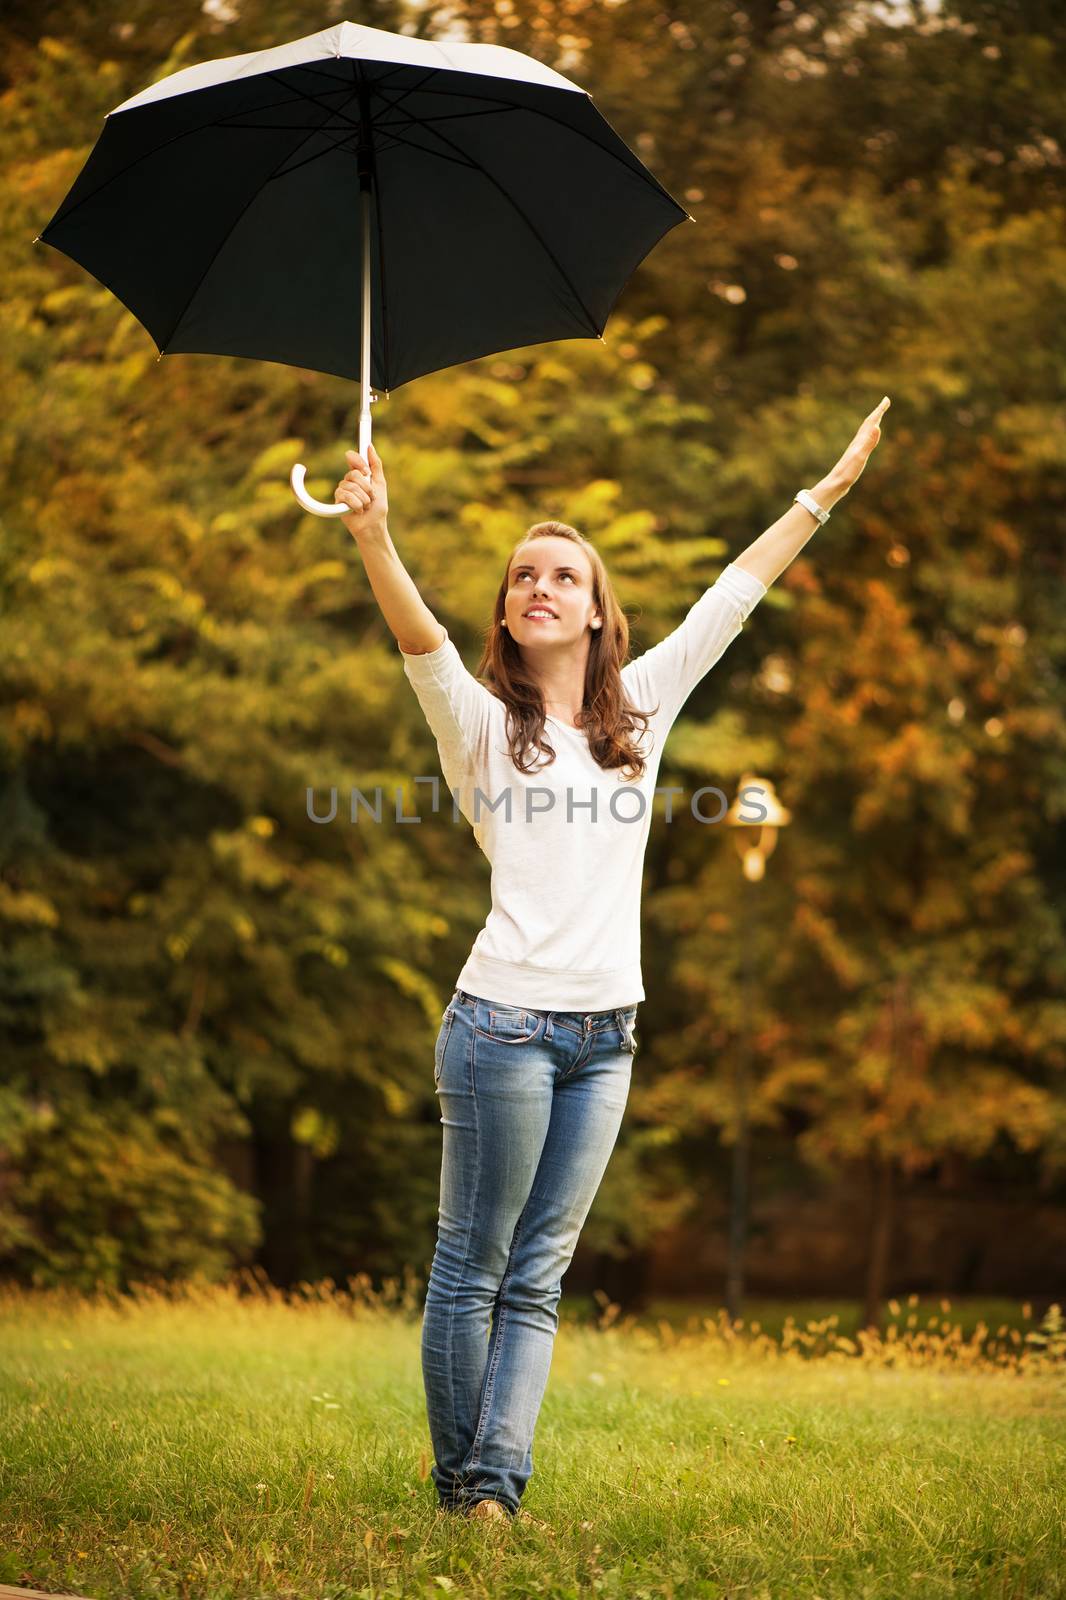 Young beautiful woman standing in rainy autumn park with umbrella and arms raised.